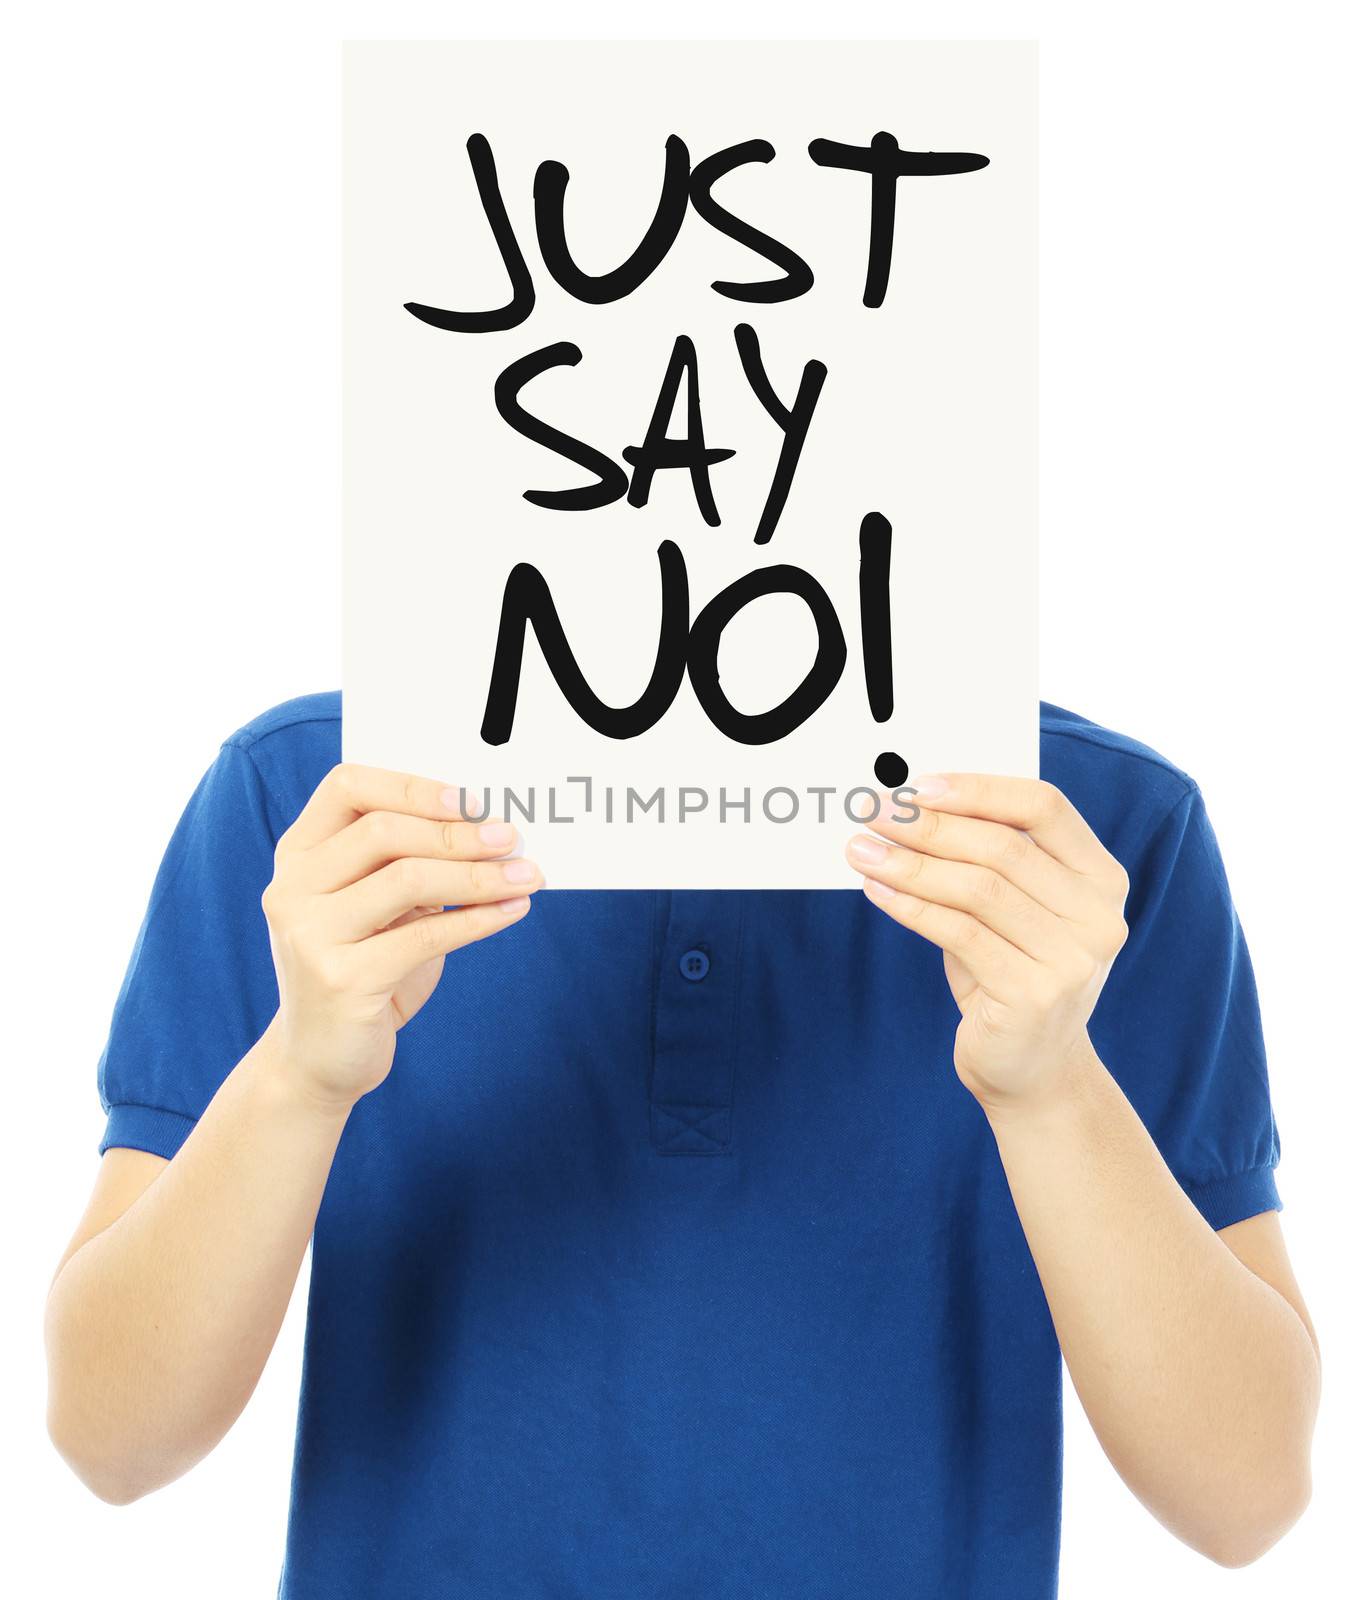 Just Say No by rnl